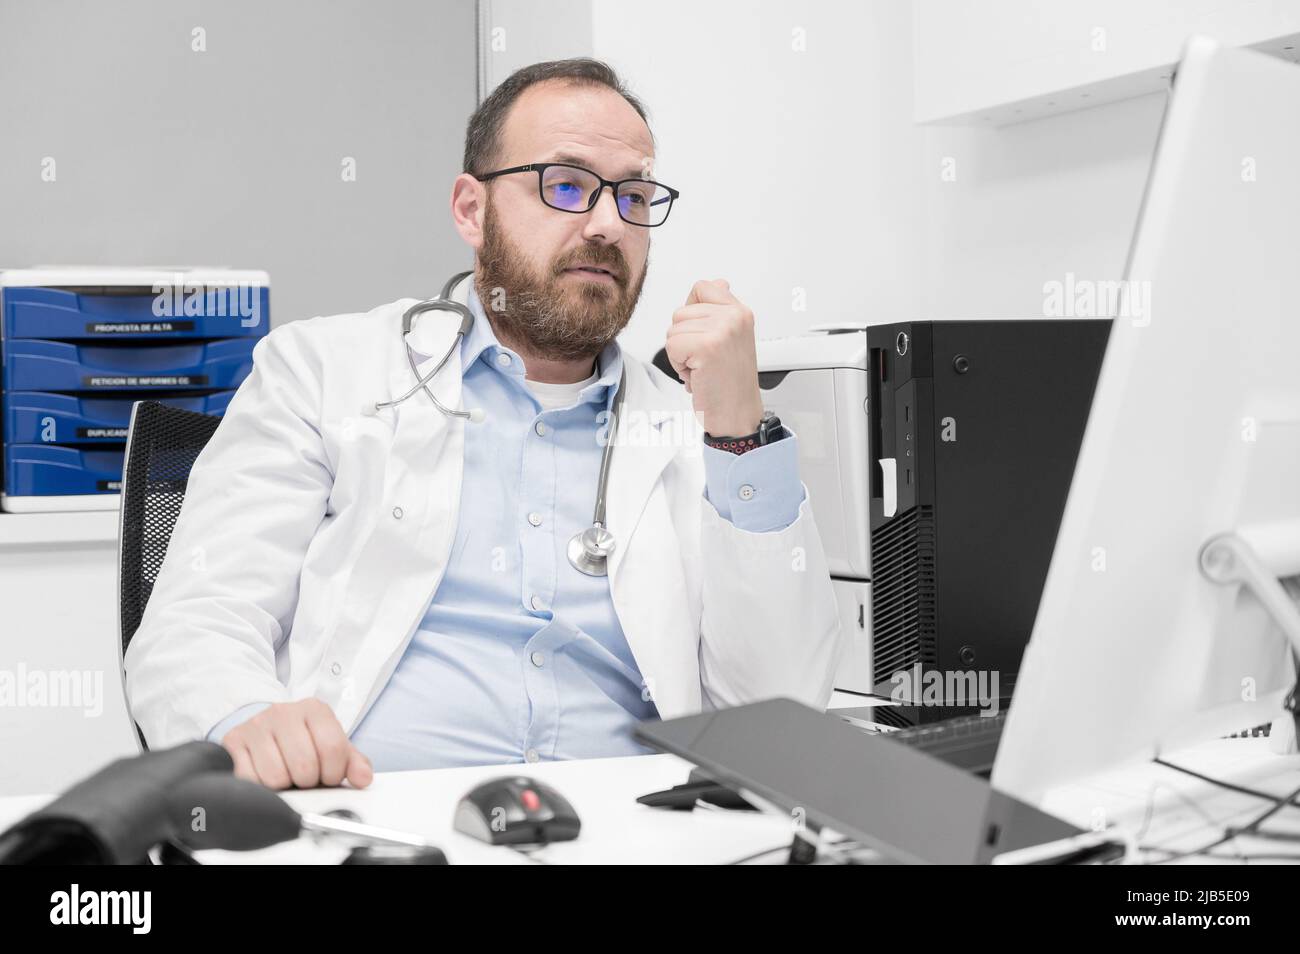 Portrait of friendly smiling healthcare professional therapist sitting at workplace. Happy confident male doctor physician wearing white medical coat Stock Photo